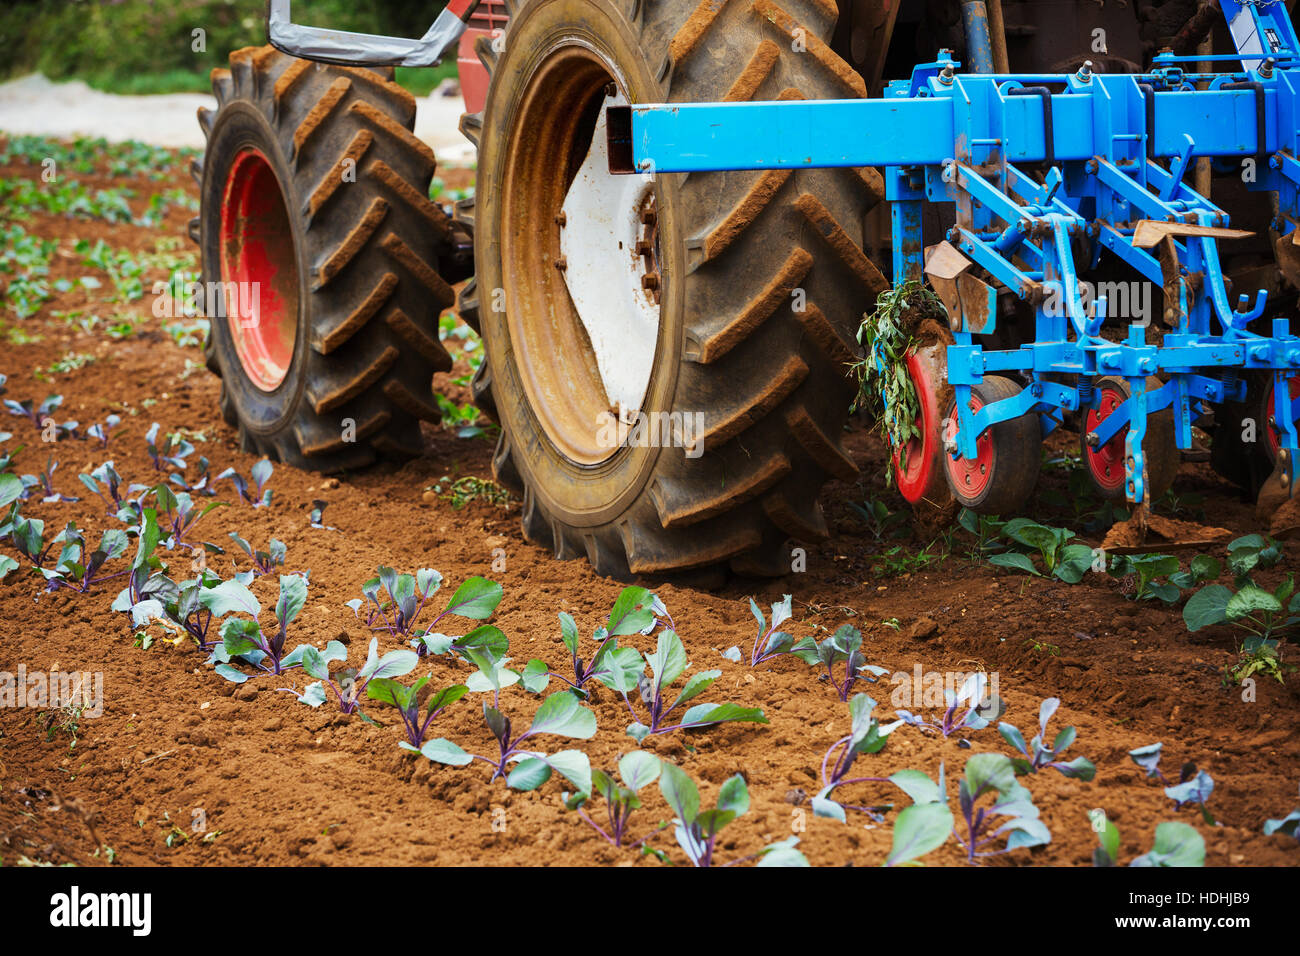 Tractor pulling a cultivator over a field with rows of small plants. Stock Photo